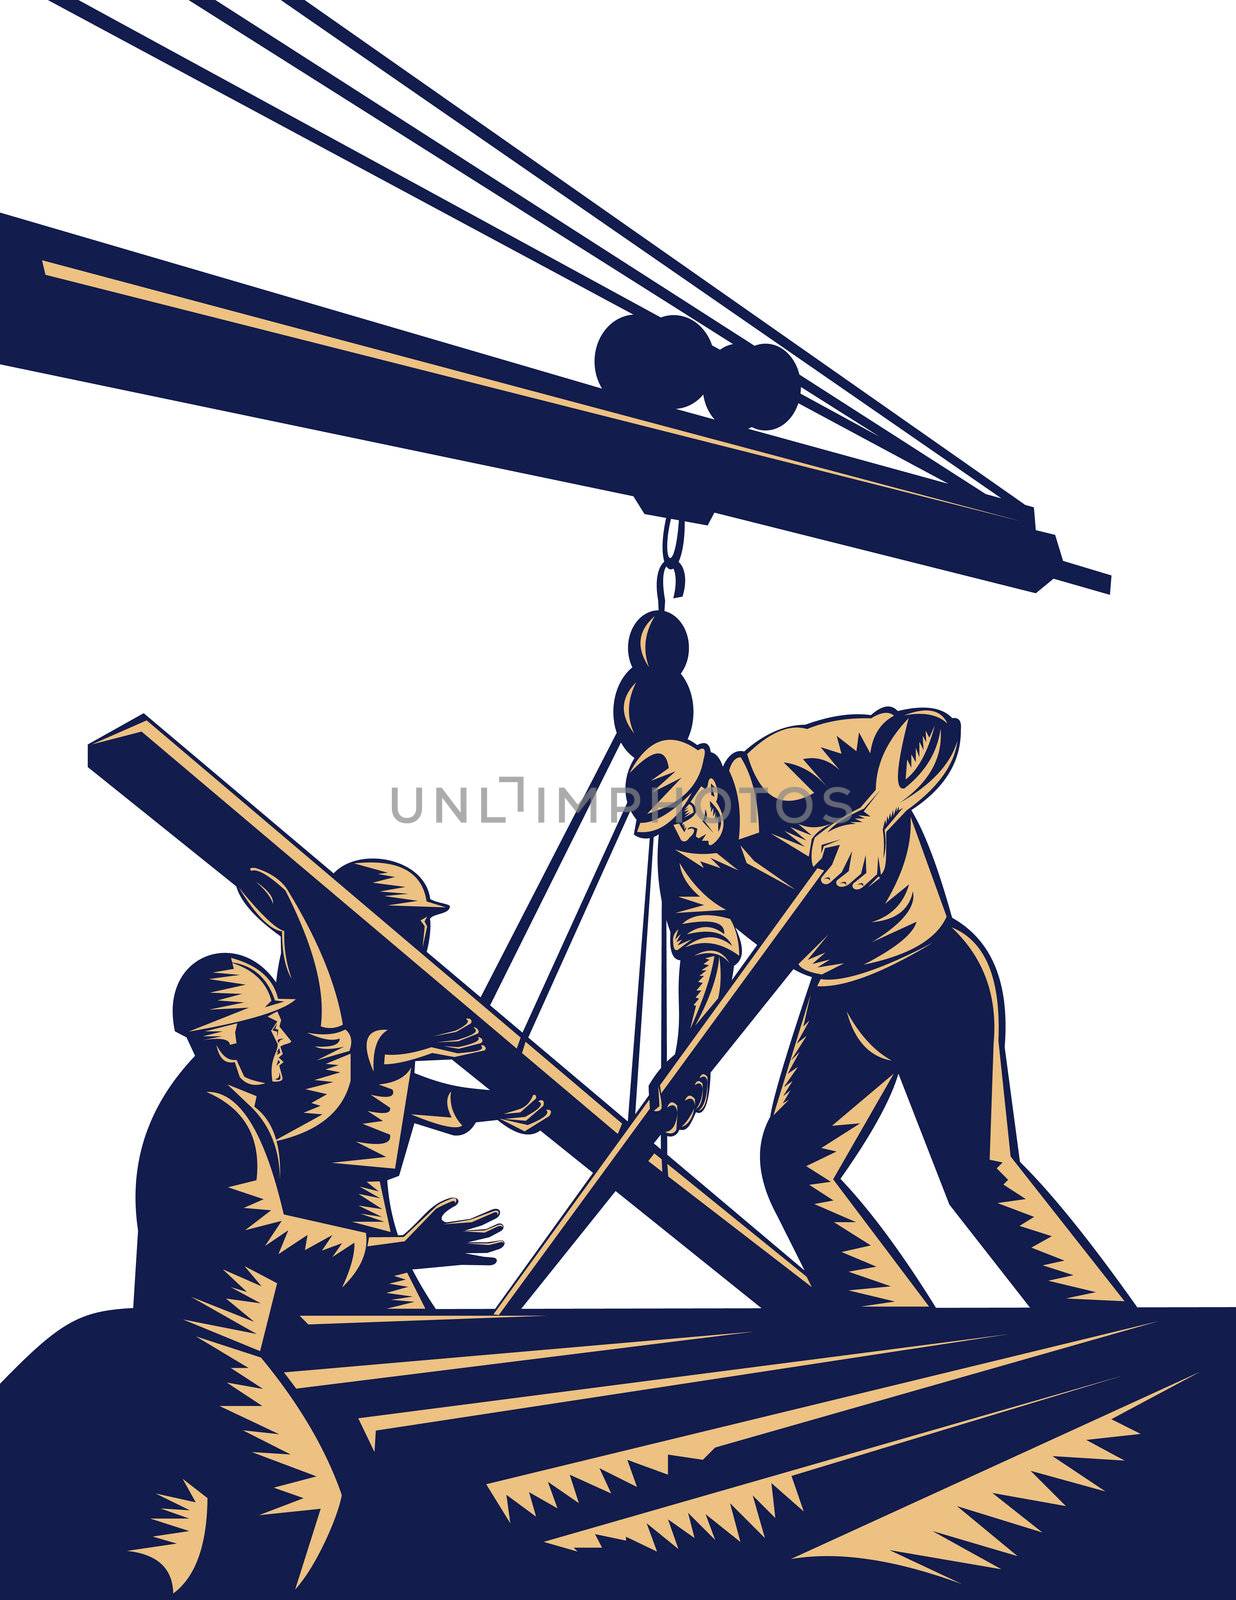 illustration of a group of Construction workers hoisting timber on boom done in woodcut style.